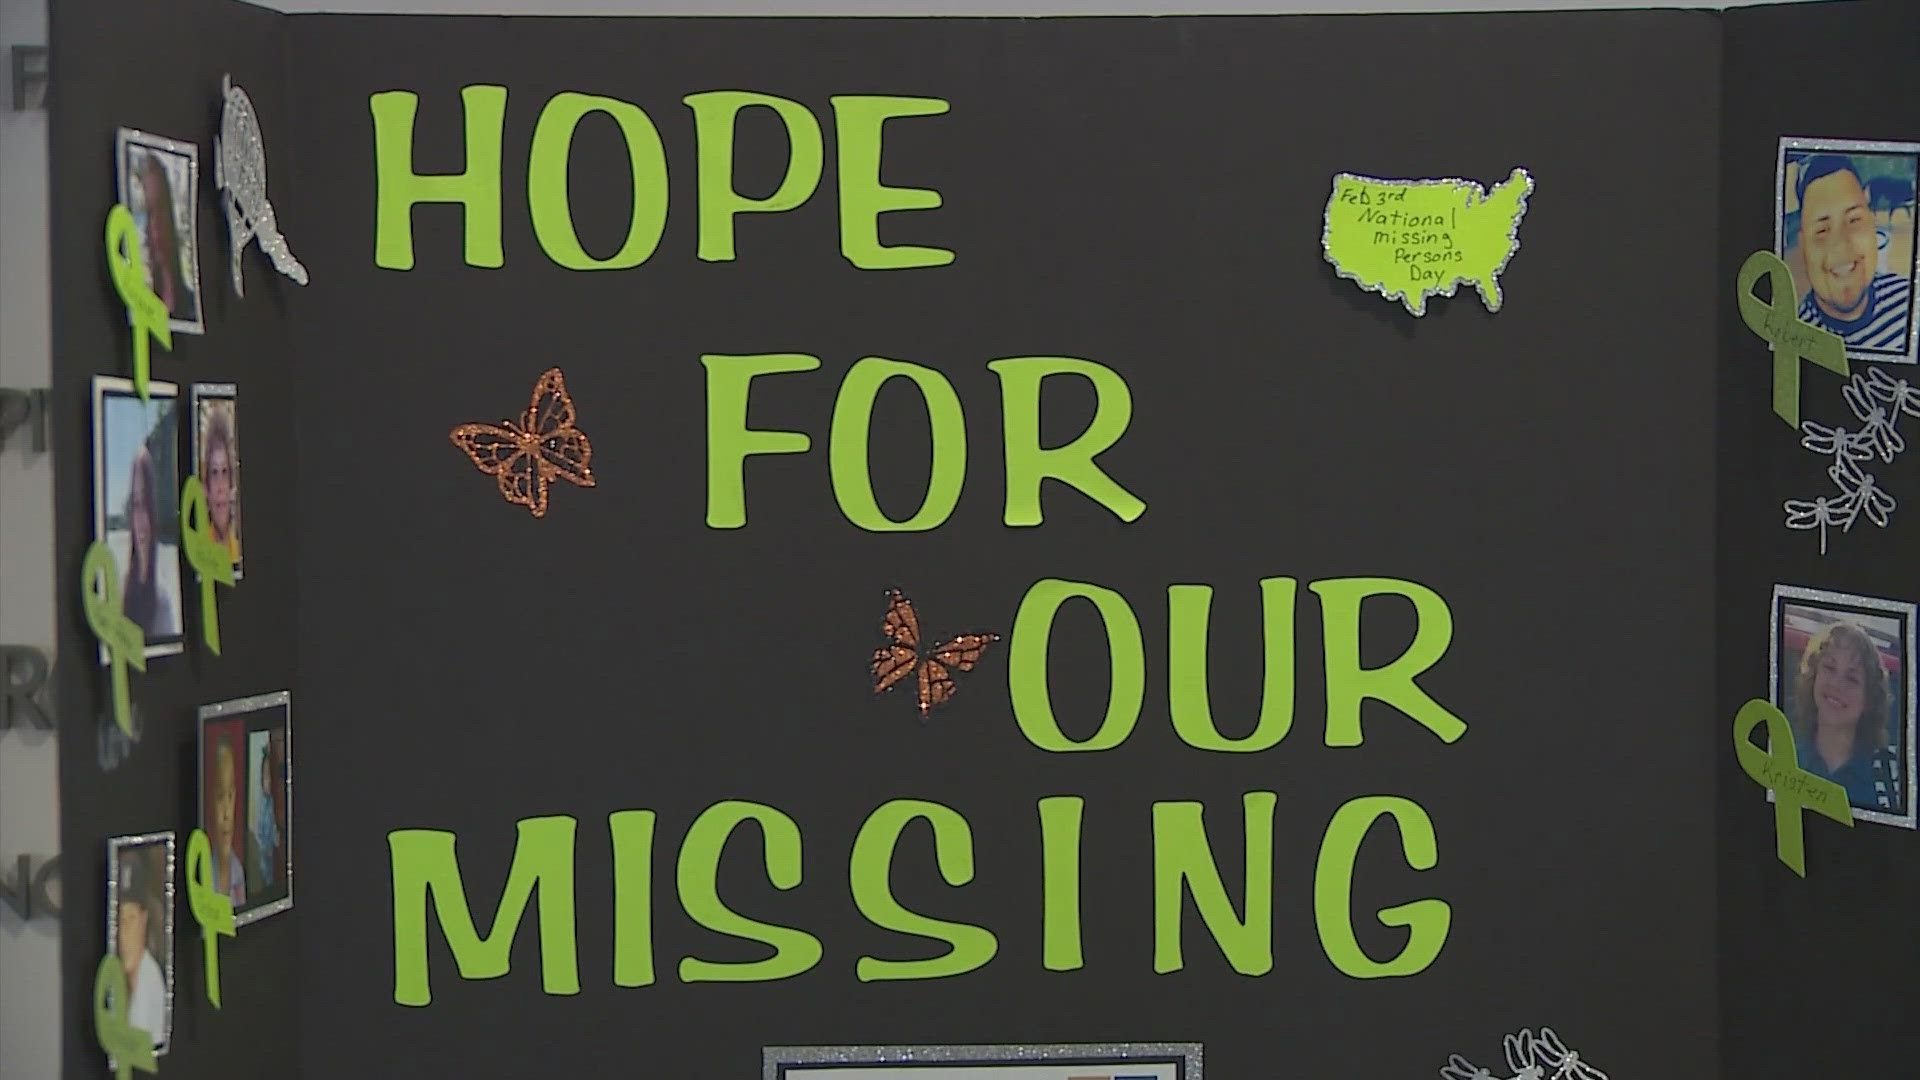 The annual "Missing in Southeast Texas" event brings families and resources together under one roof to find answers and possibly closure.